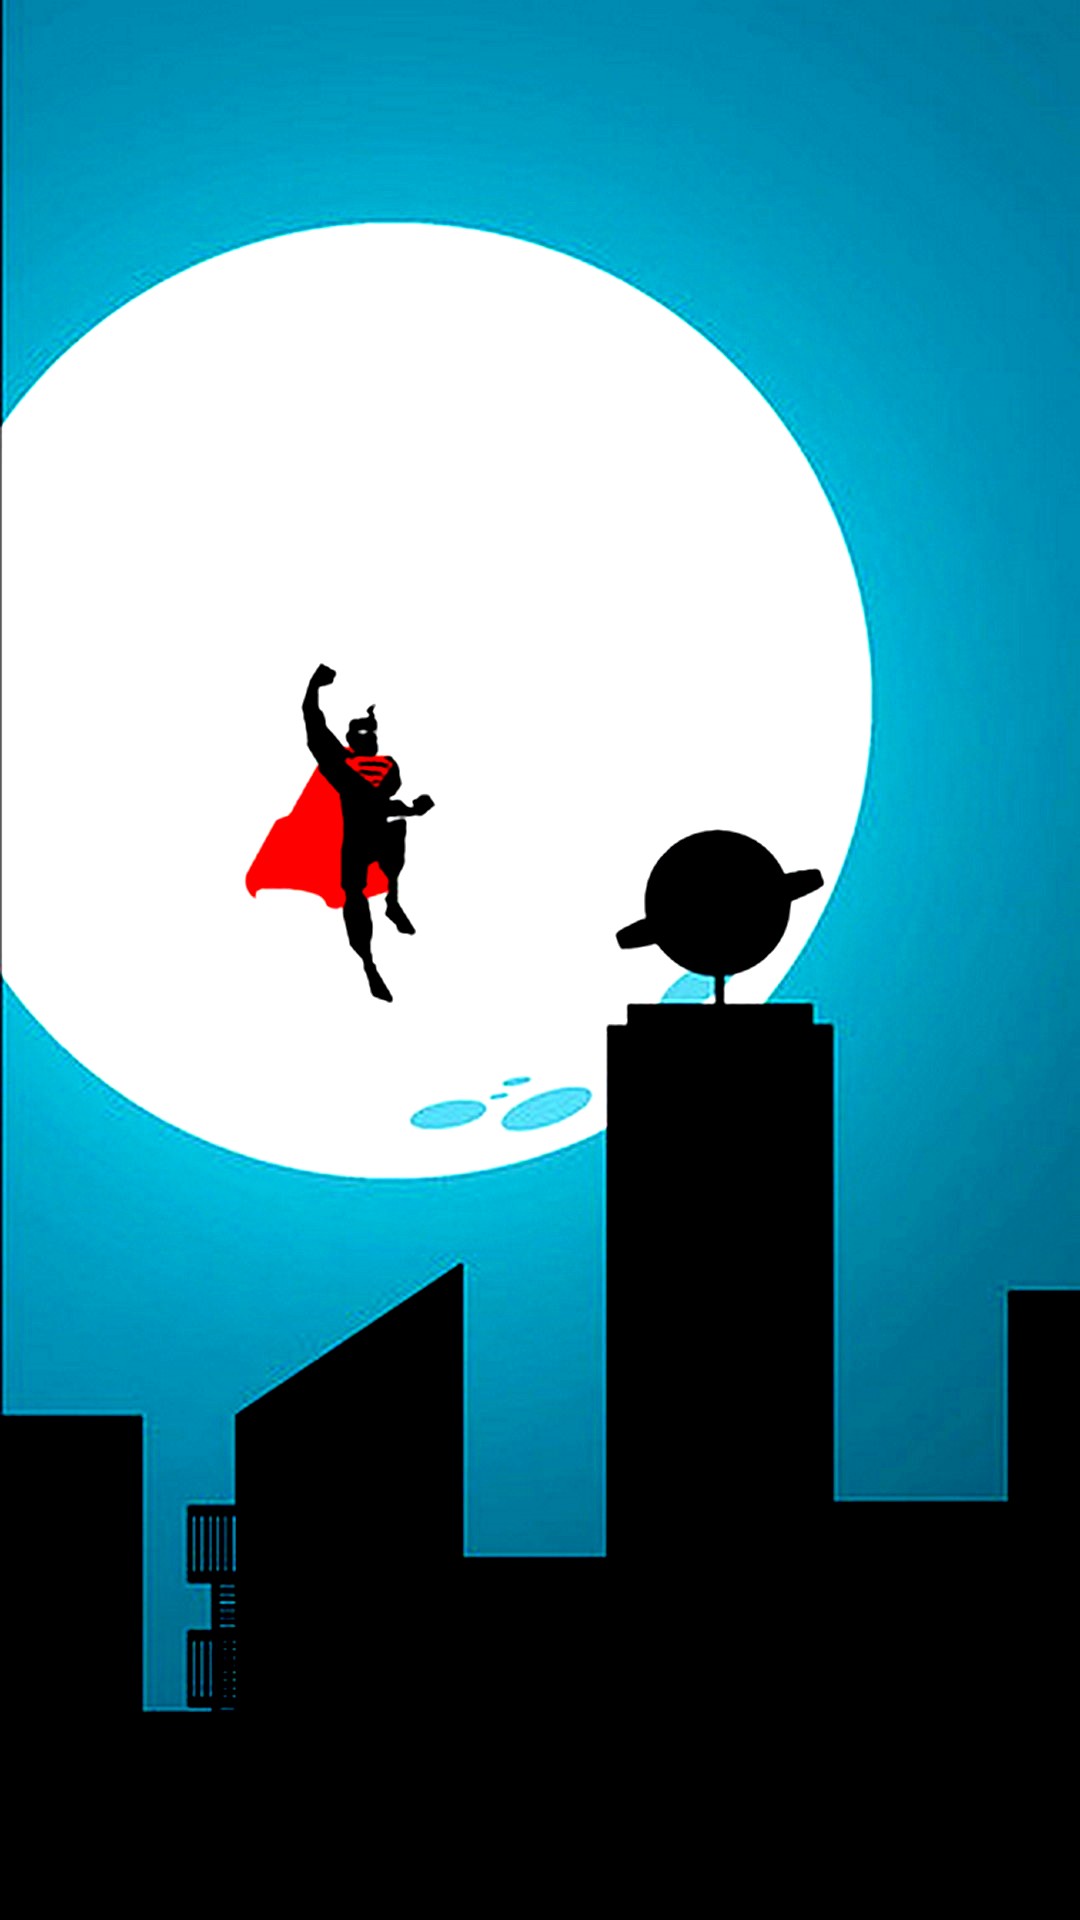 Mobile Wallpaper Superman With high-resolution 1080X1920 pixel. You can use this poster wallpaper for your Desktop Computers, Mac Screensavers, Windows Backgrounds, iPhone Wallpapers, Tablet or Android Lock screen and another Mobile device